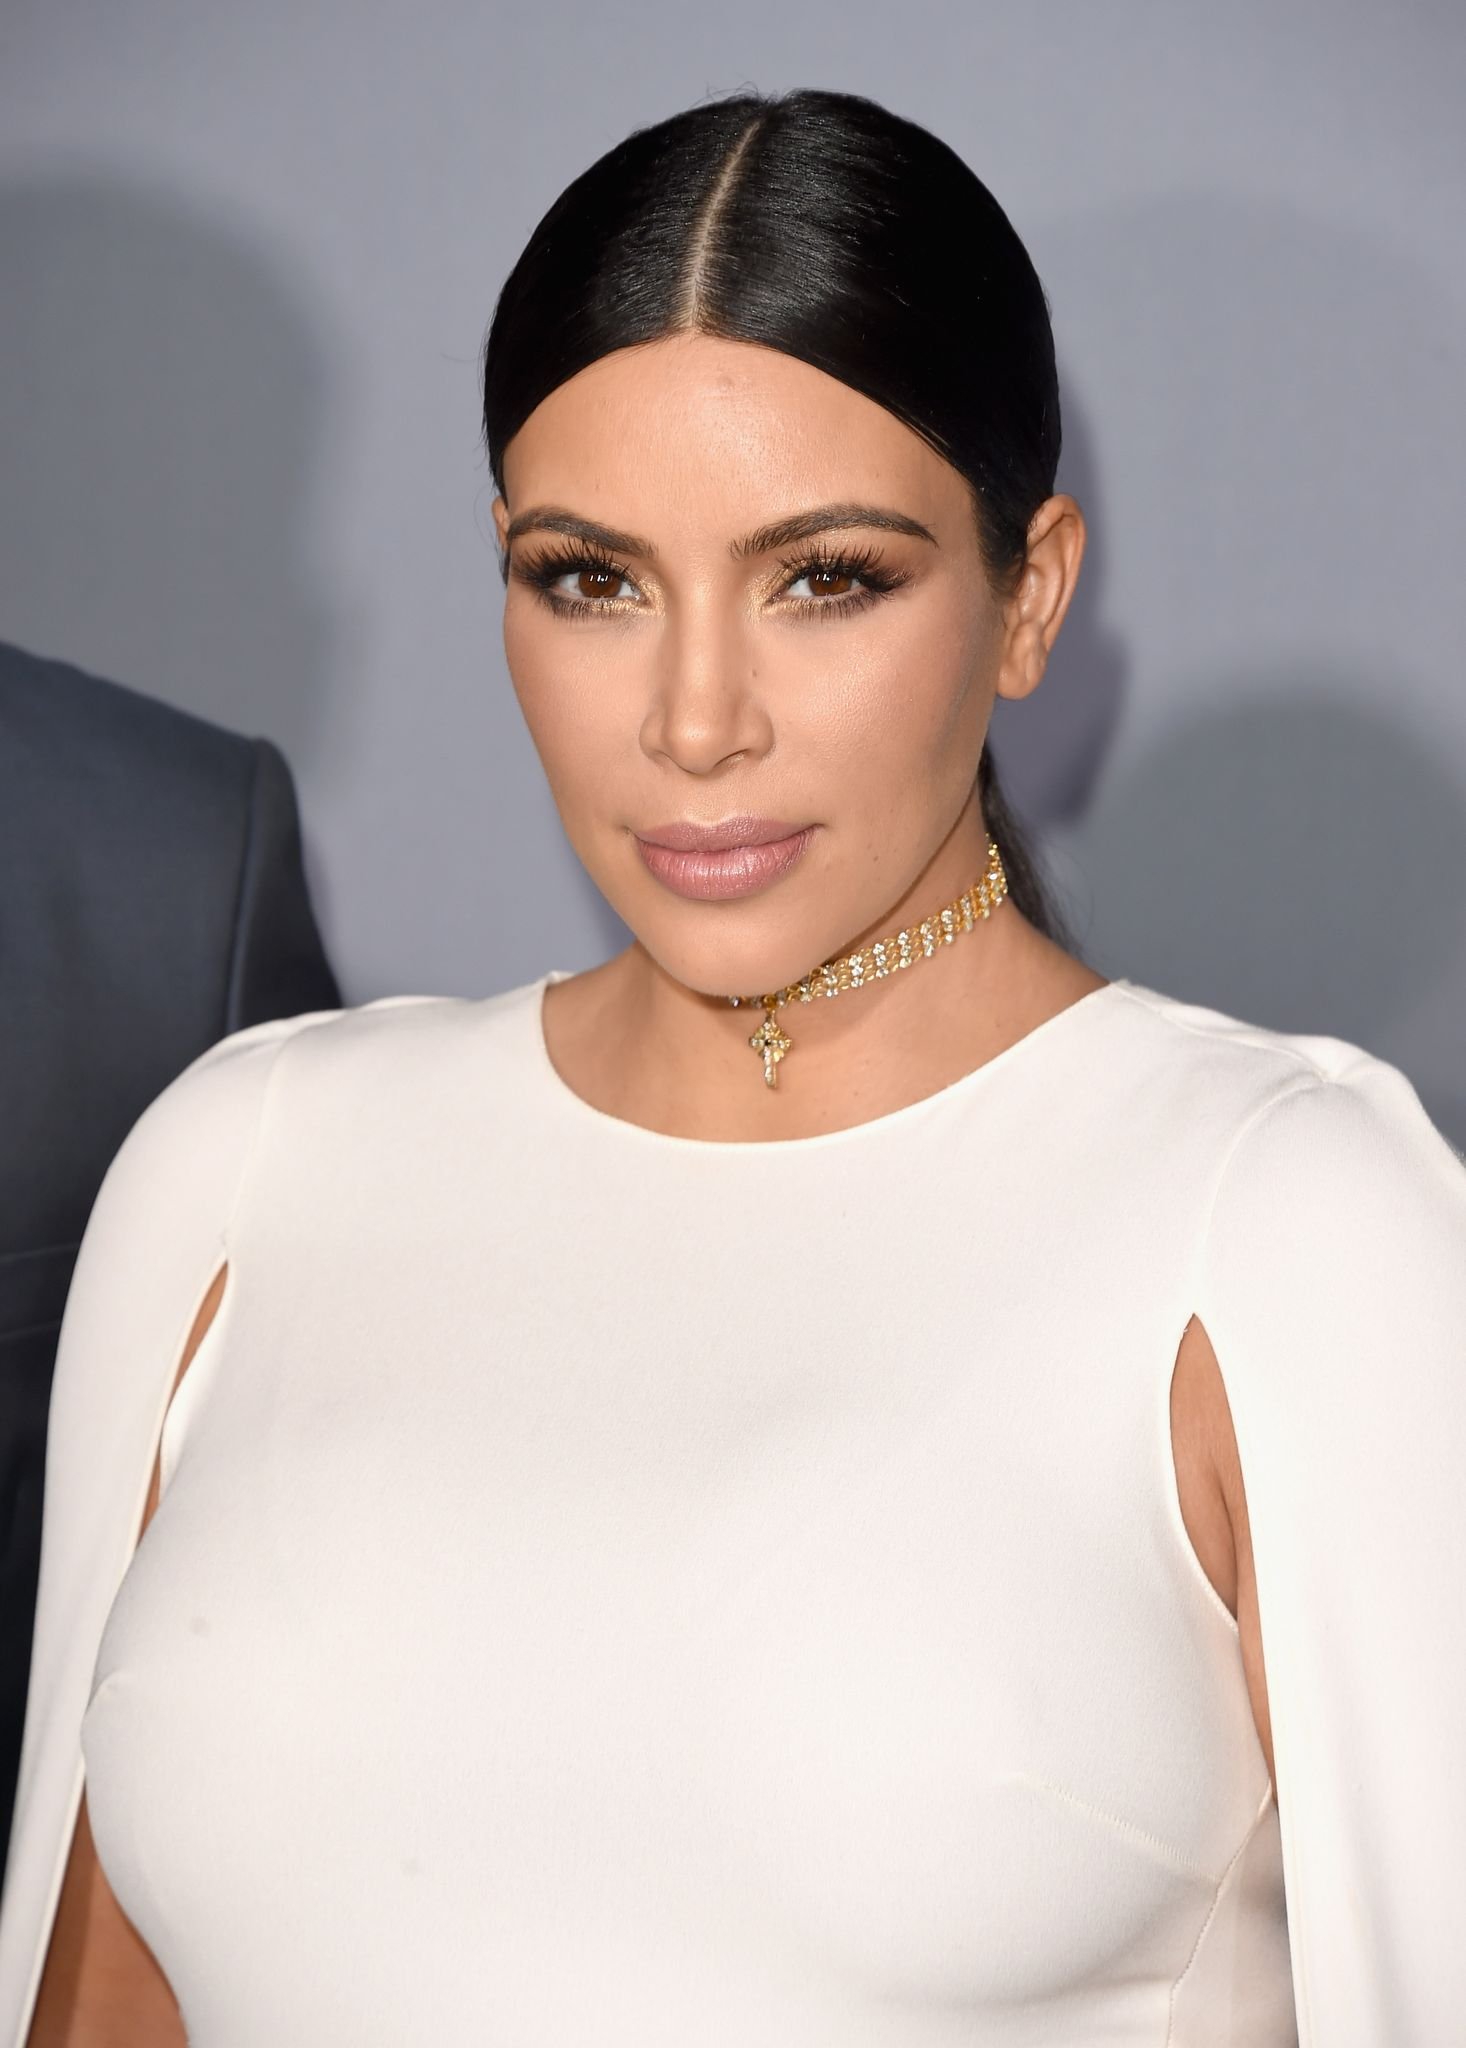 Kim Kardashian at the InStyle Awards at Getty Center on October 26, 2015 in Los Angeles. | Photo: Getty Images